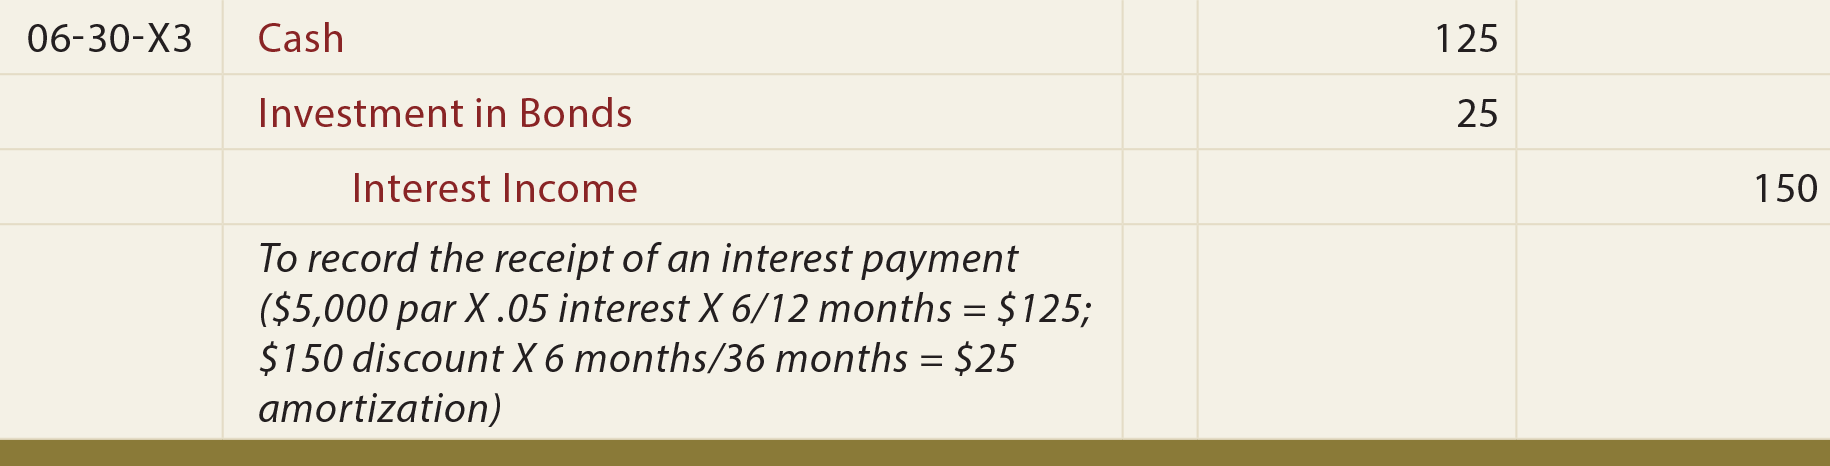 Investment in Bonds at a Discount General Journal Entry - To record the receipt of an interest payment